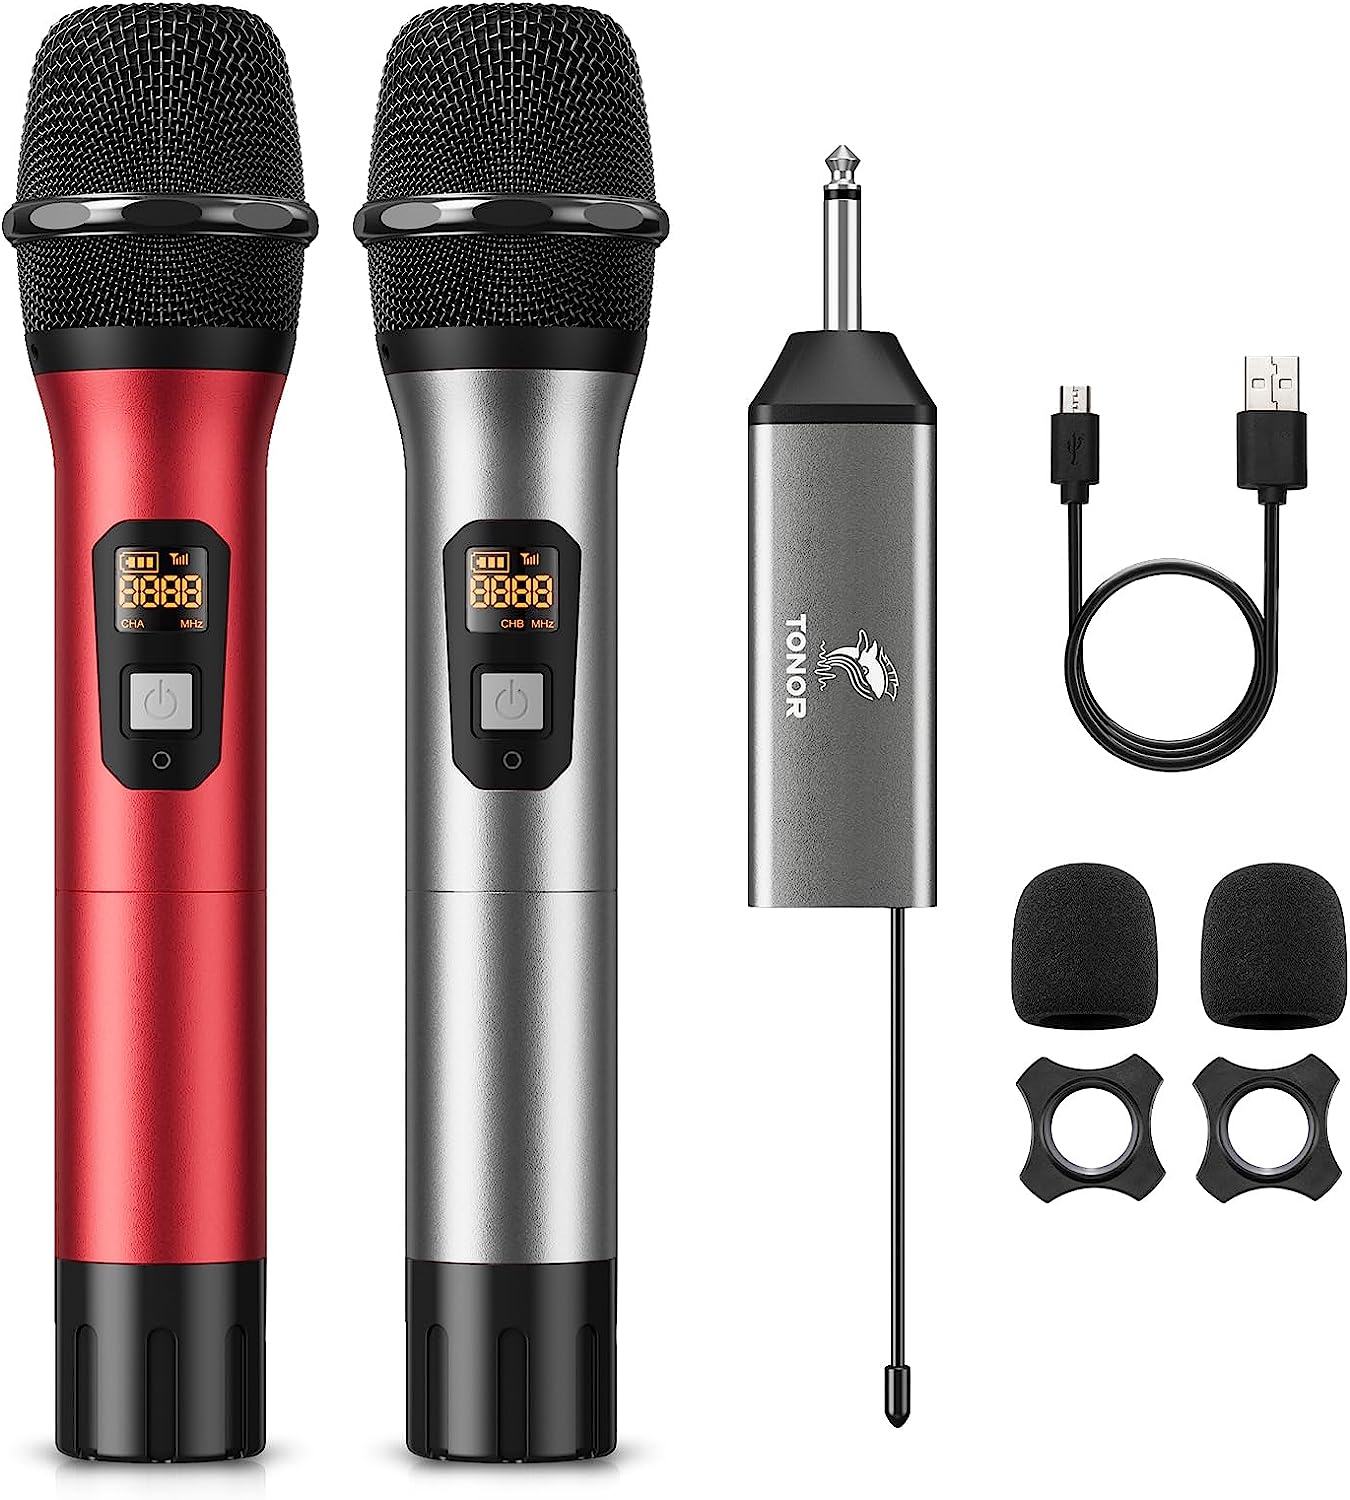 TONOR Wireless Microphone, Metal Cordless Mic with [...]